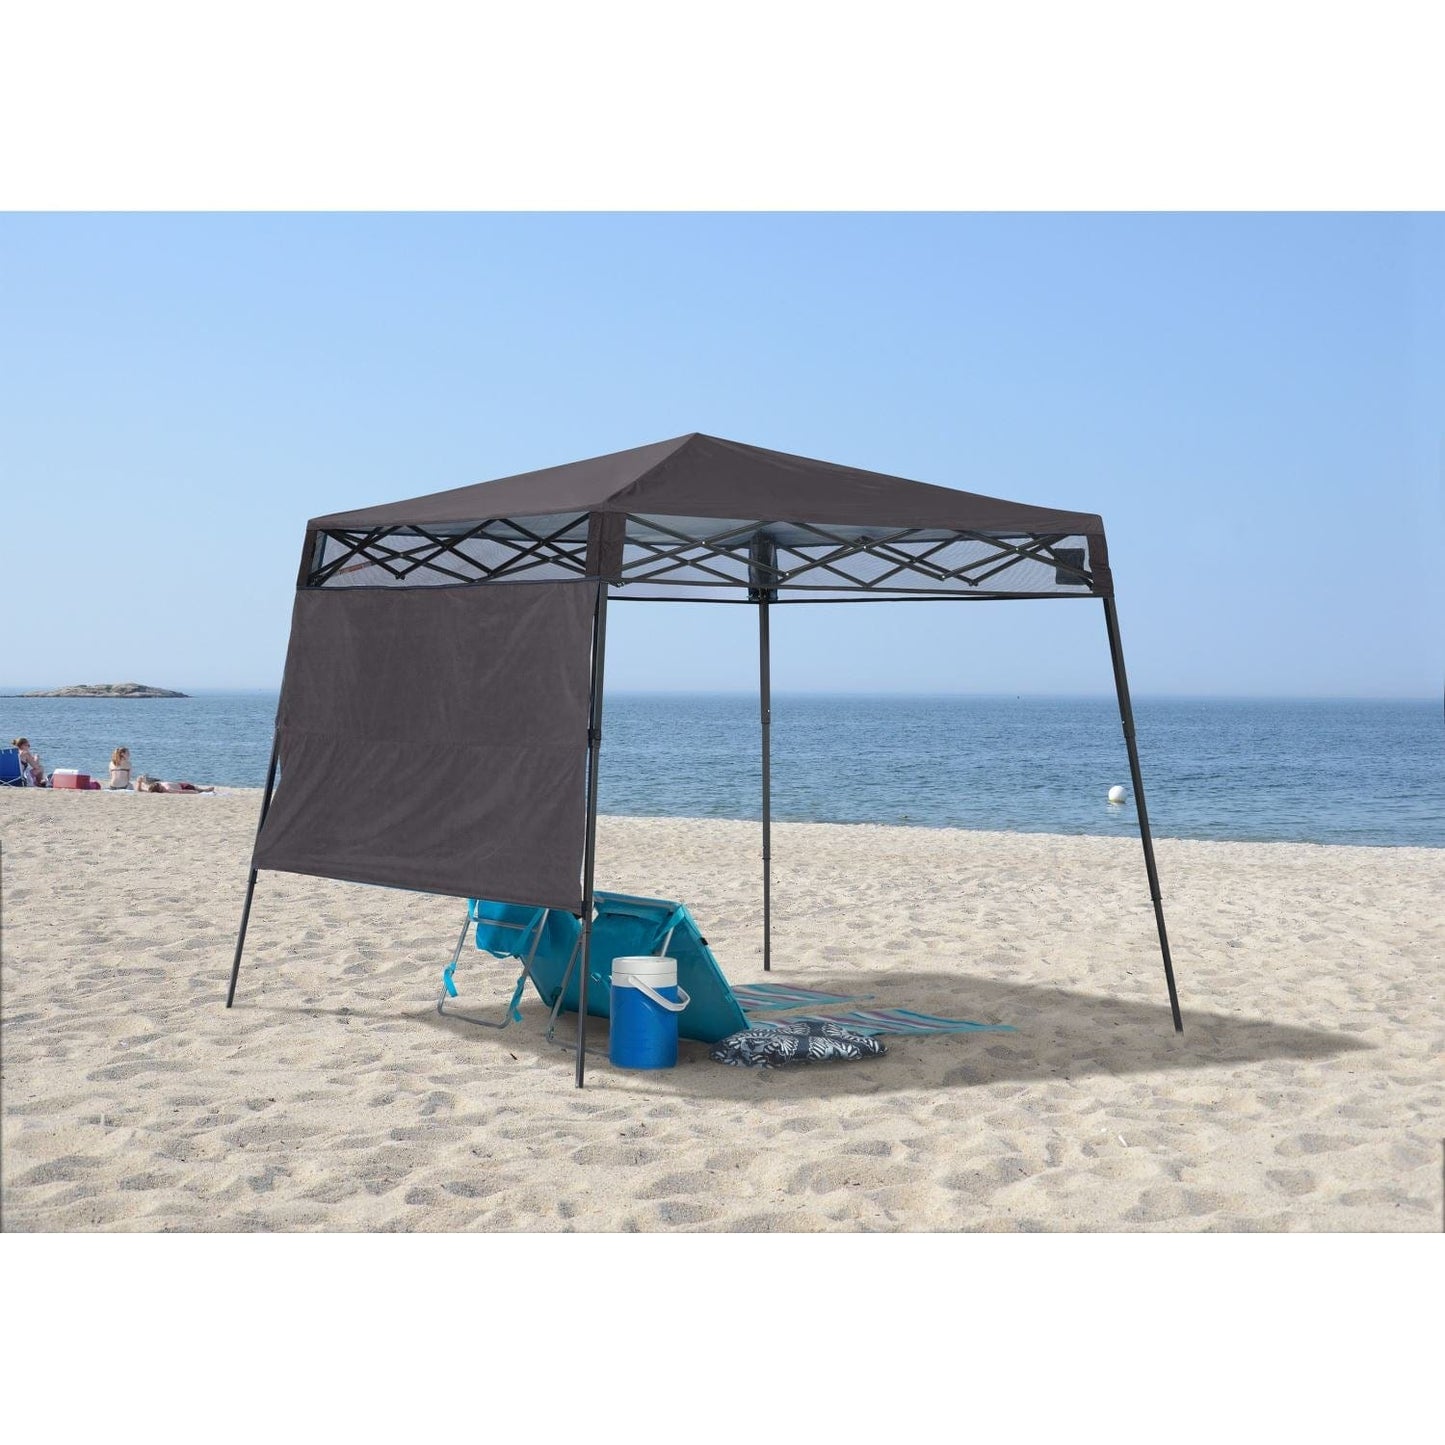 Quik Shade Pop Up Canopies Quik Shade | Go Hybrid 6' x 6' Slant Leg Canopy - Charcoal 167520DS